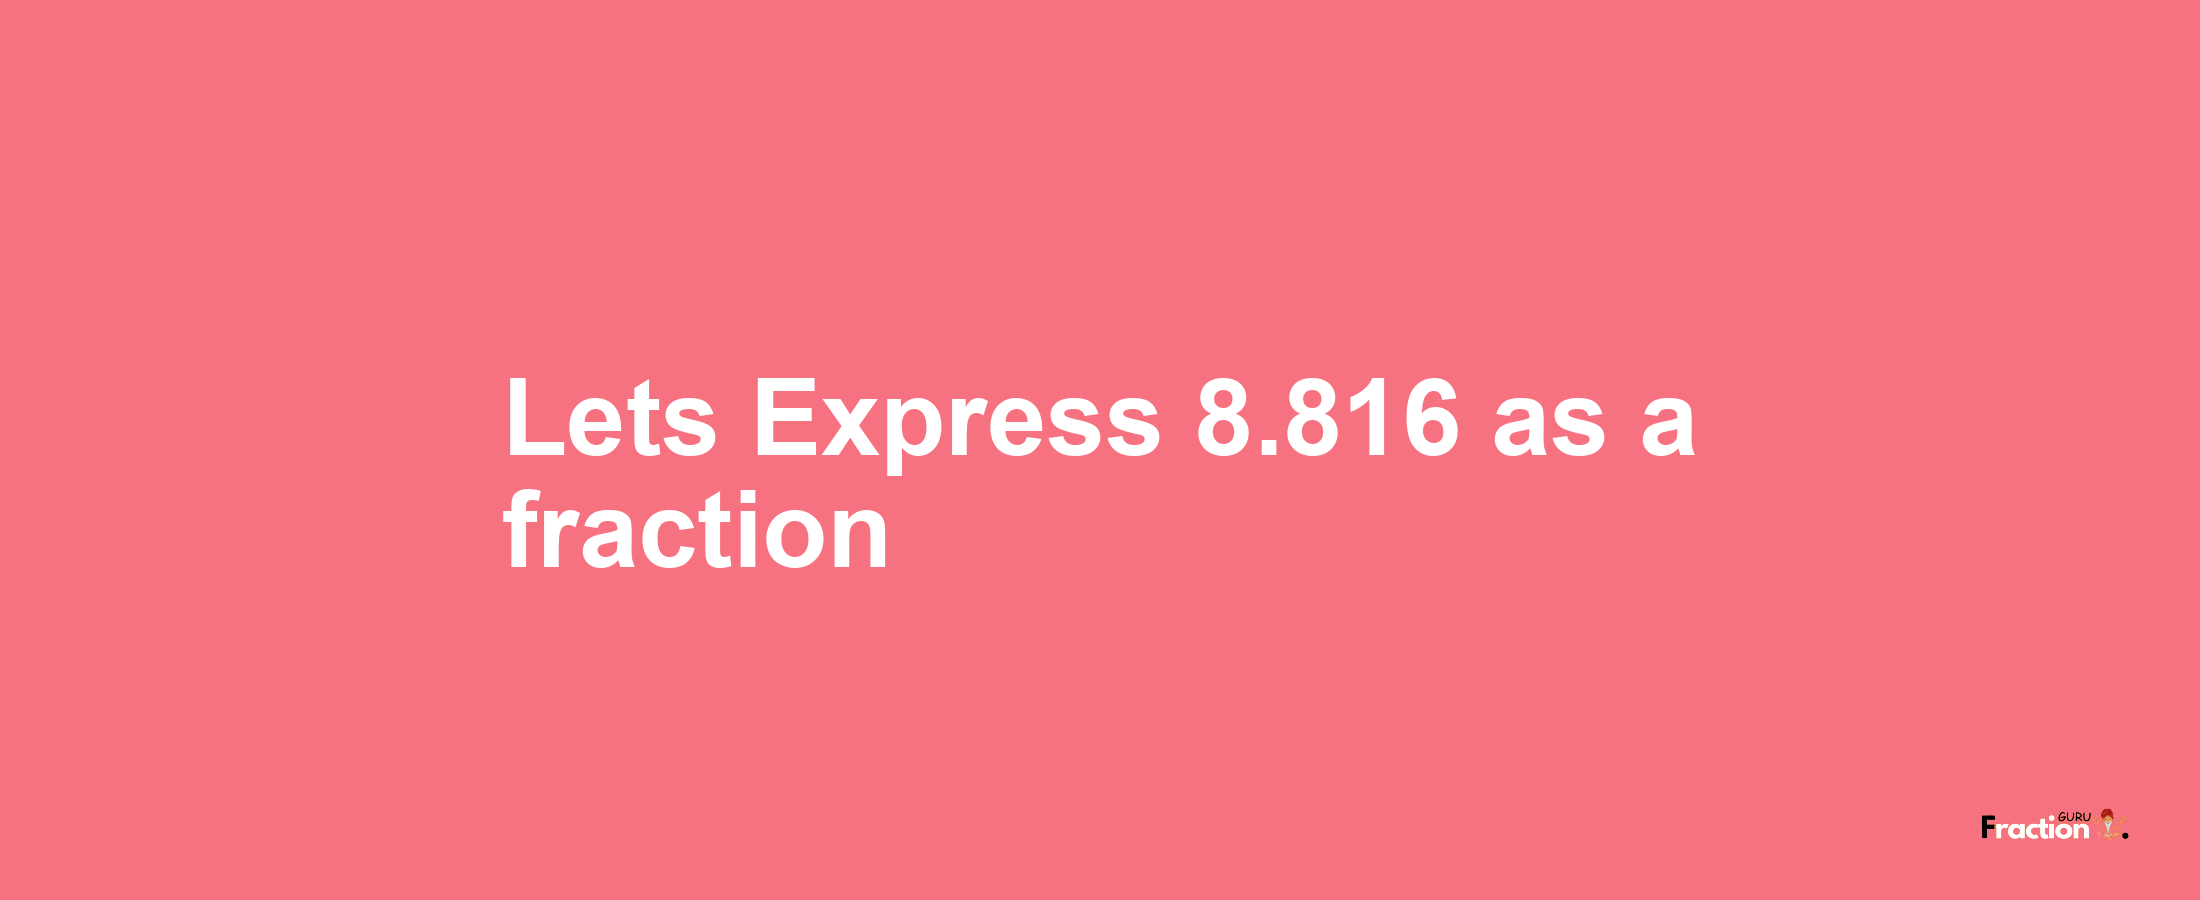 Lets Express 8.816 as afraction